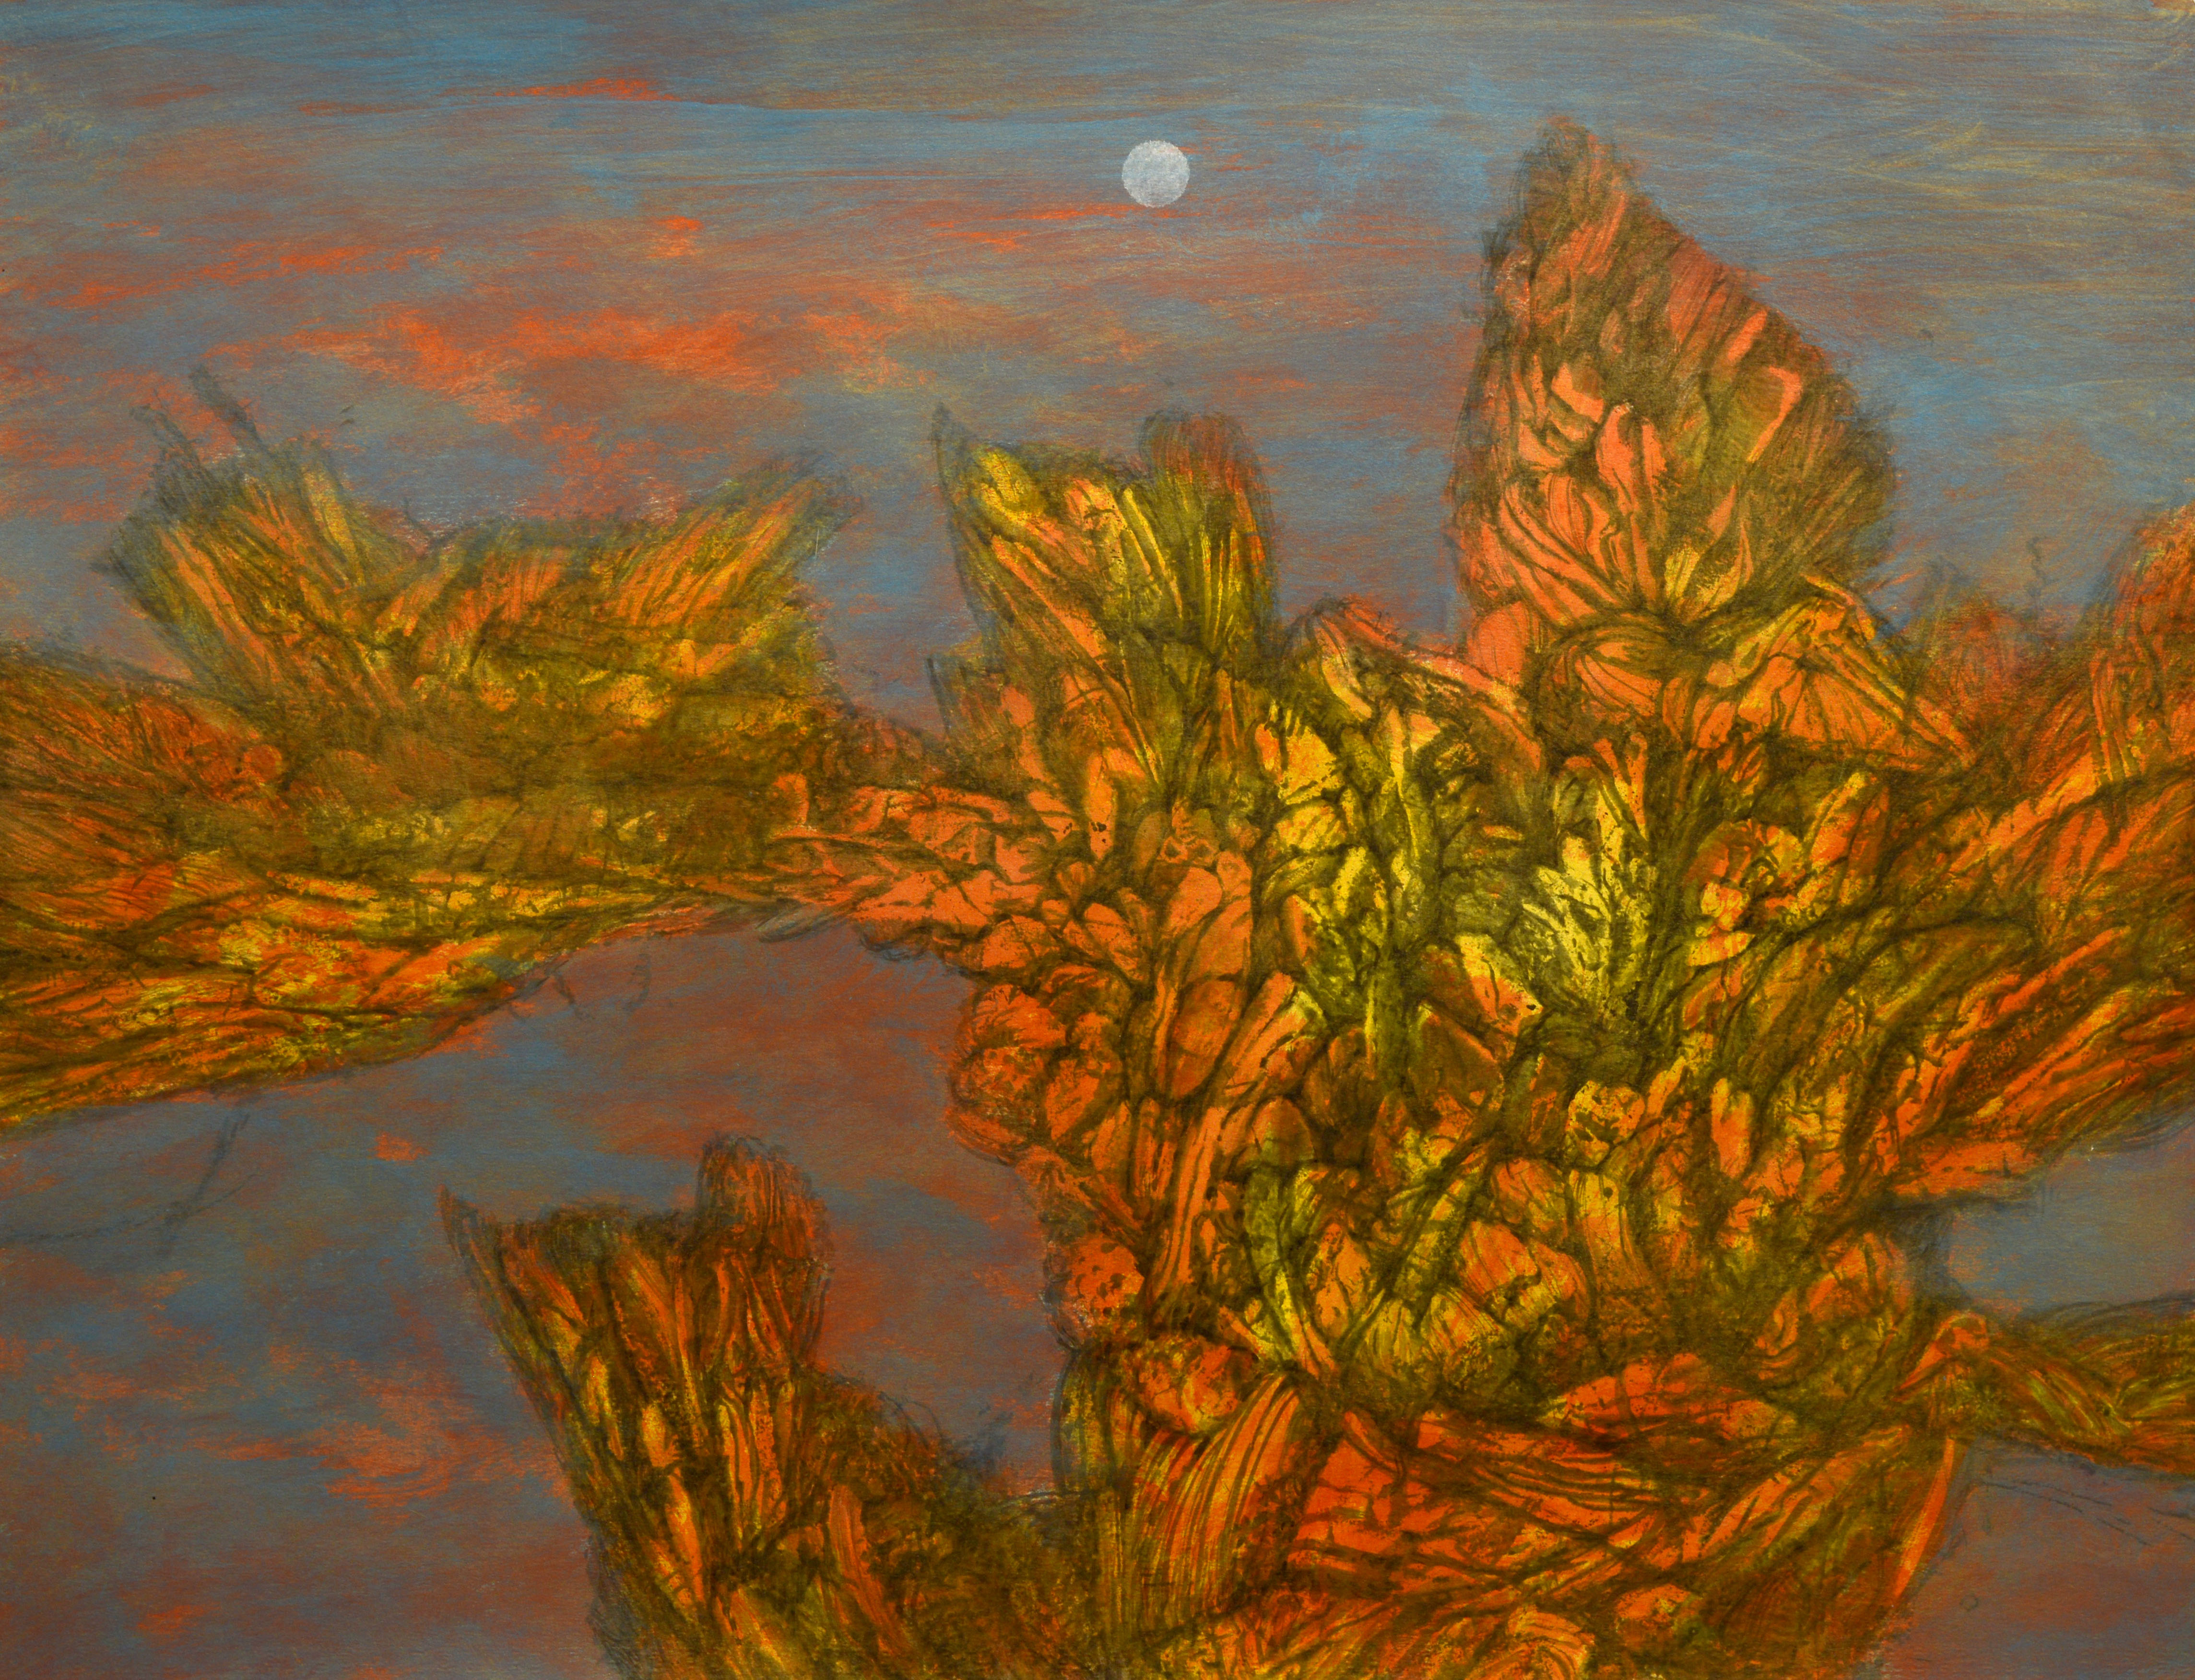 "Separate Paths, Similar Visions," exhibit featuring landscapes of Justin Nuyda and Juvenal Sanso